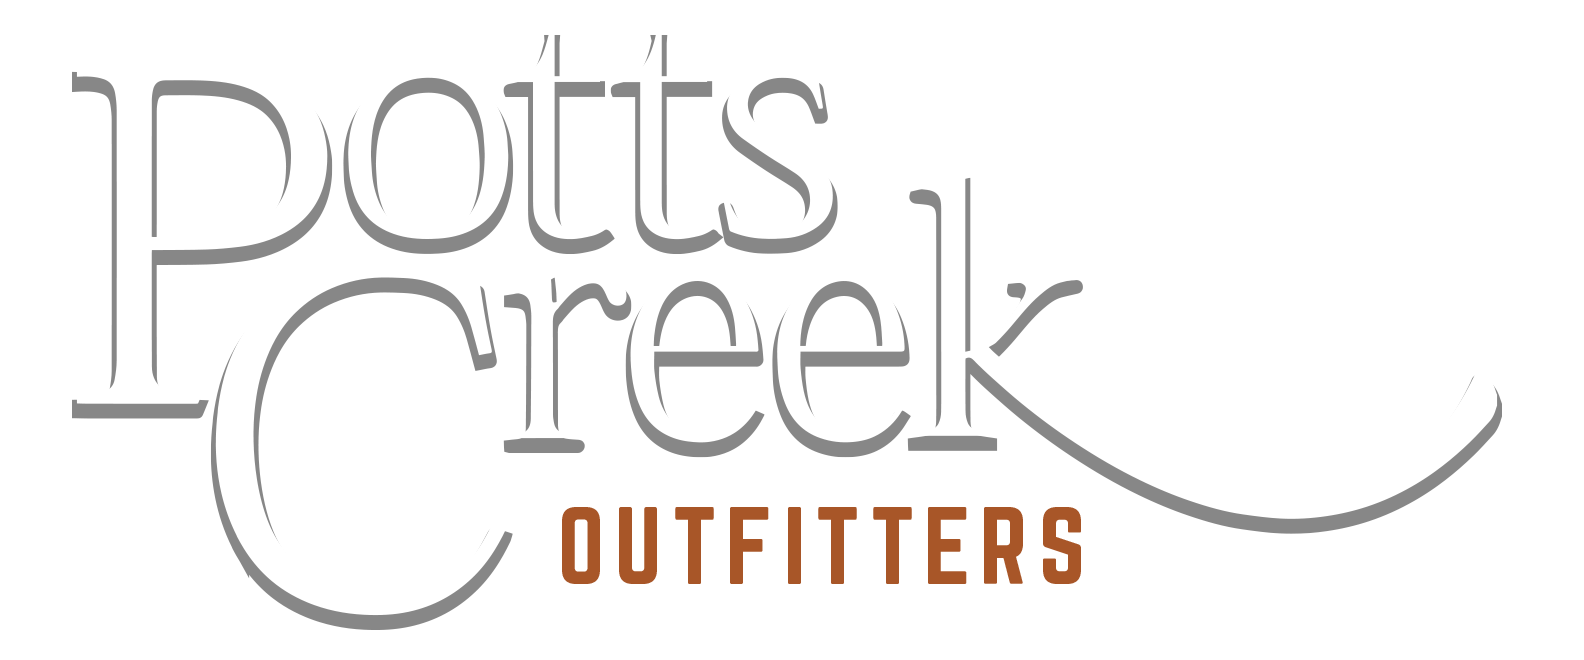 Potts Creek Outfitters